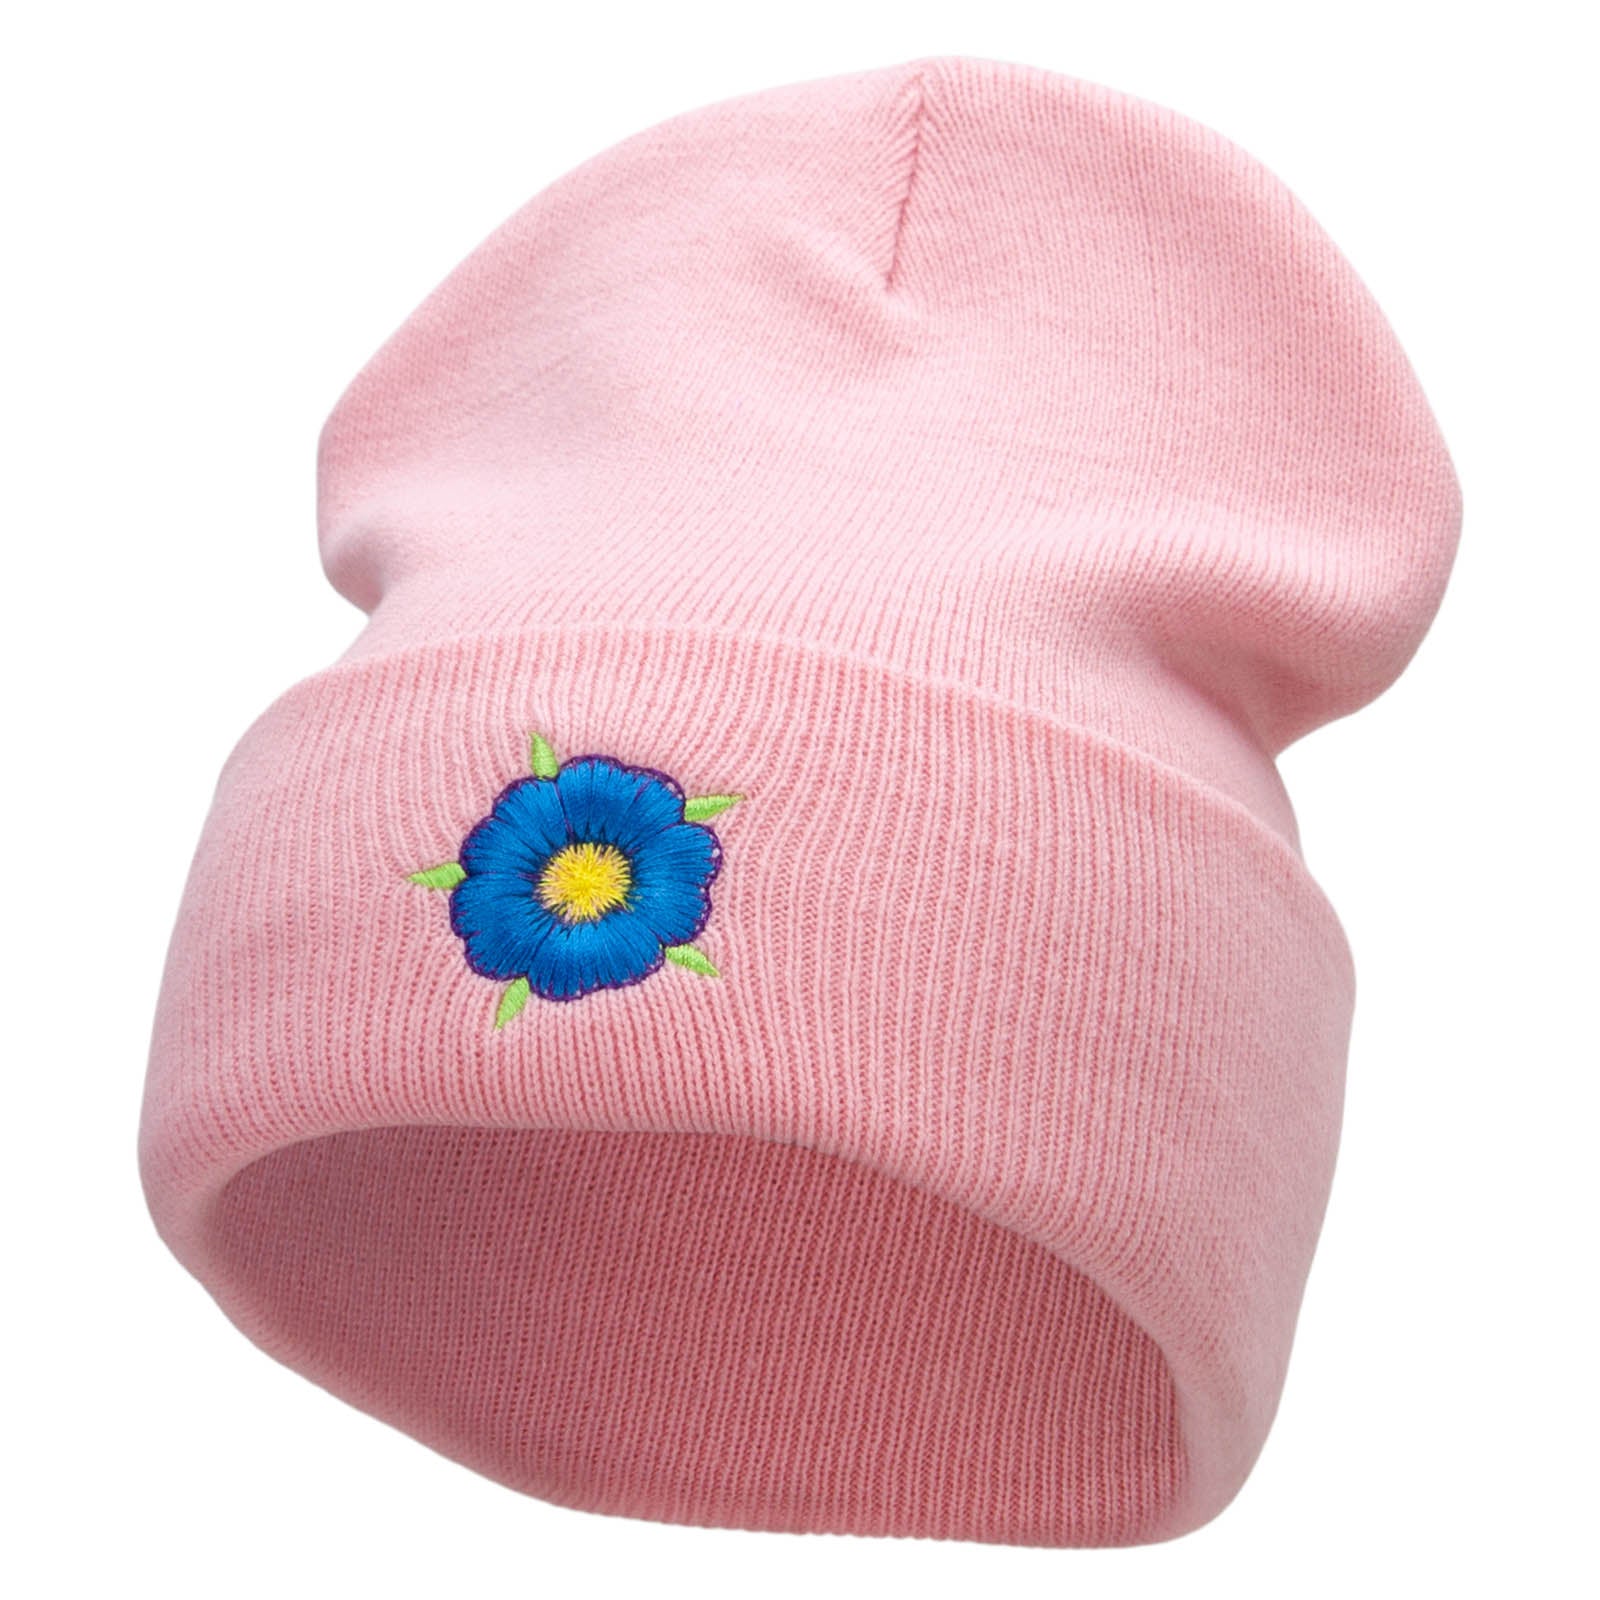 Blue Flower Embroidered 12 inch Acrylic Cuffed Long Beanie - Pink OSFM